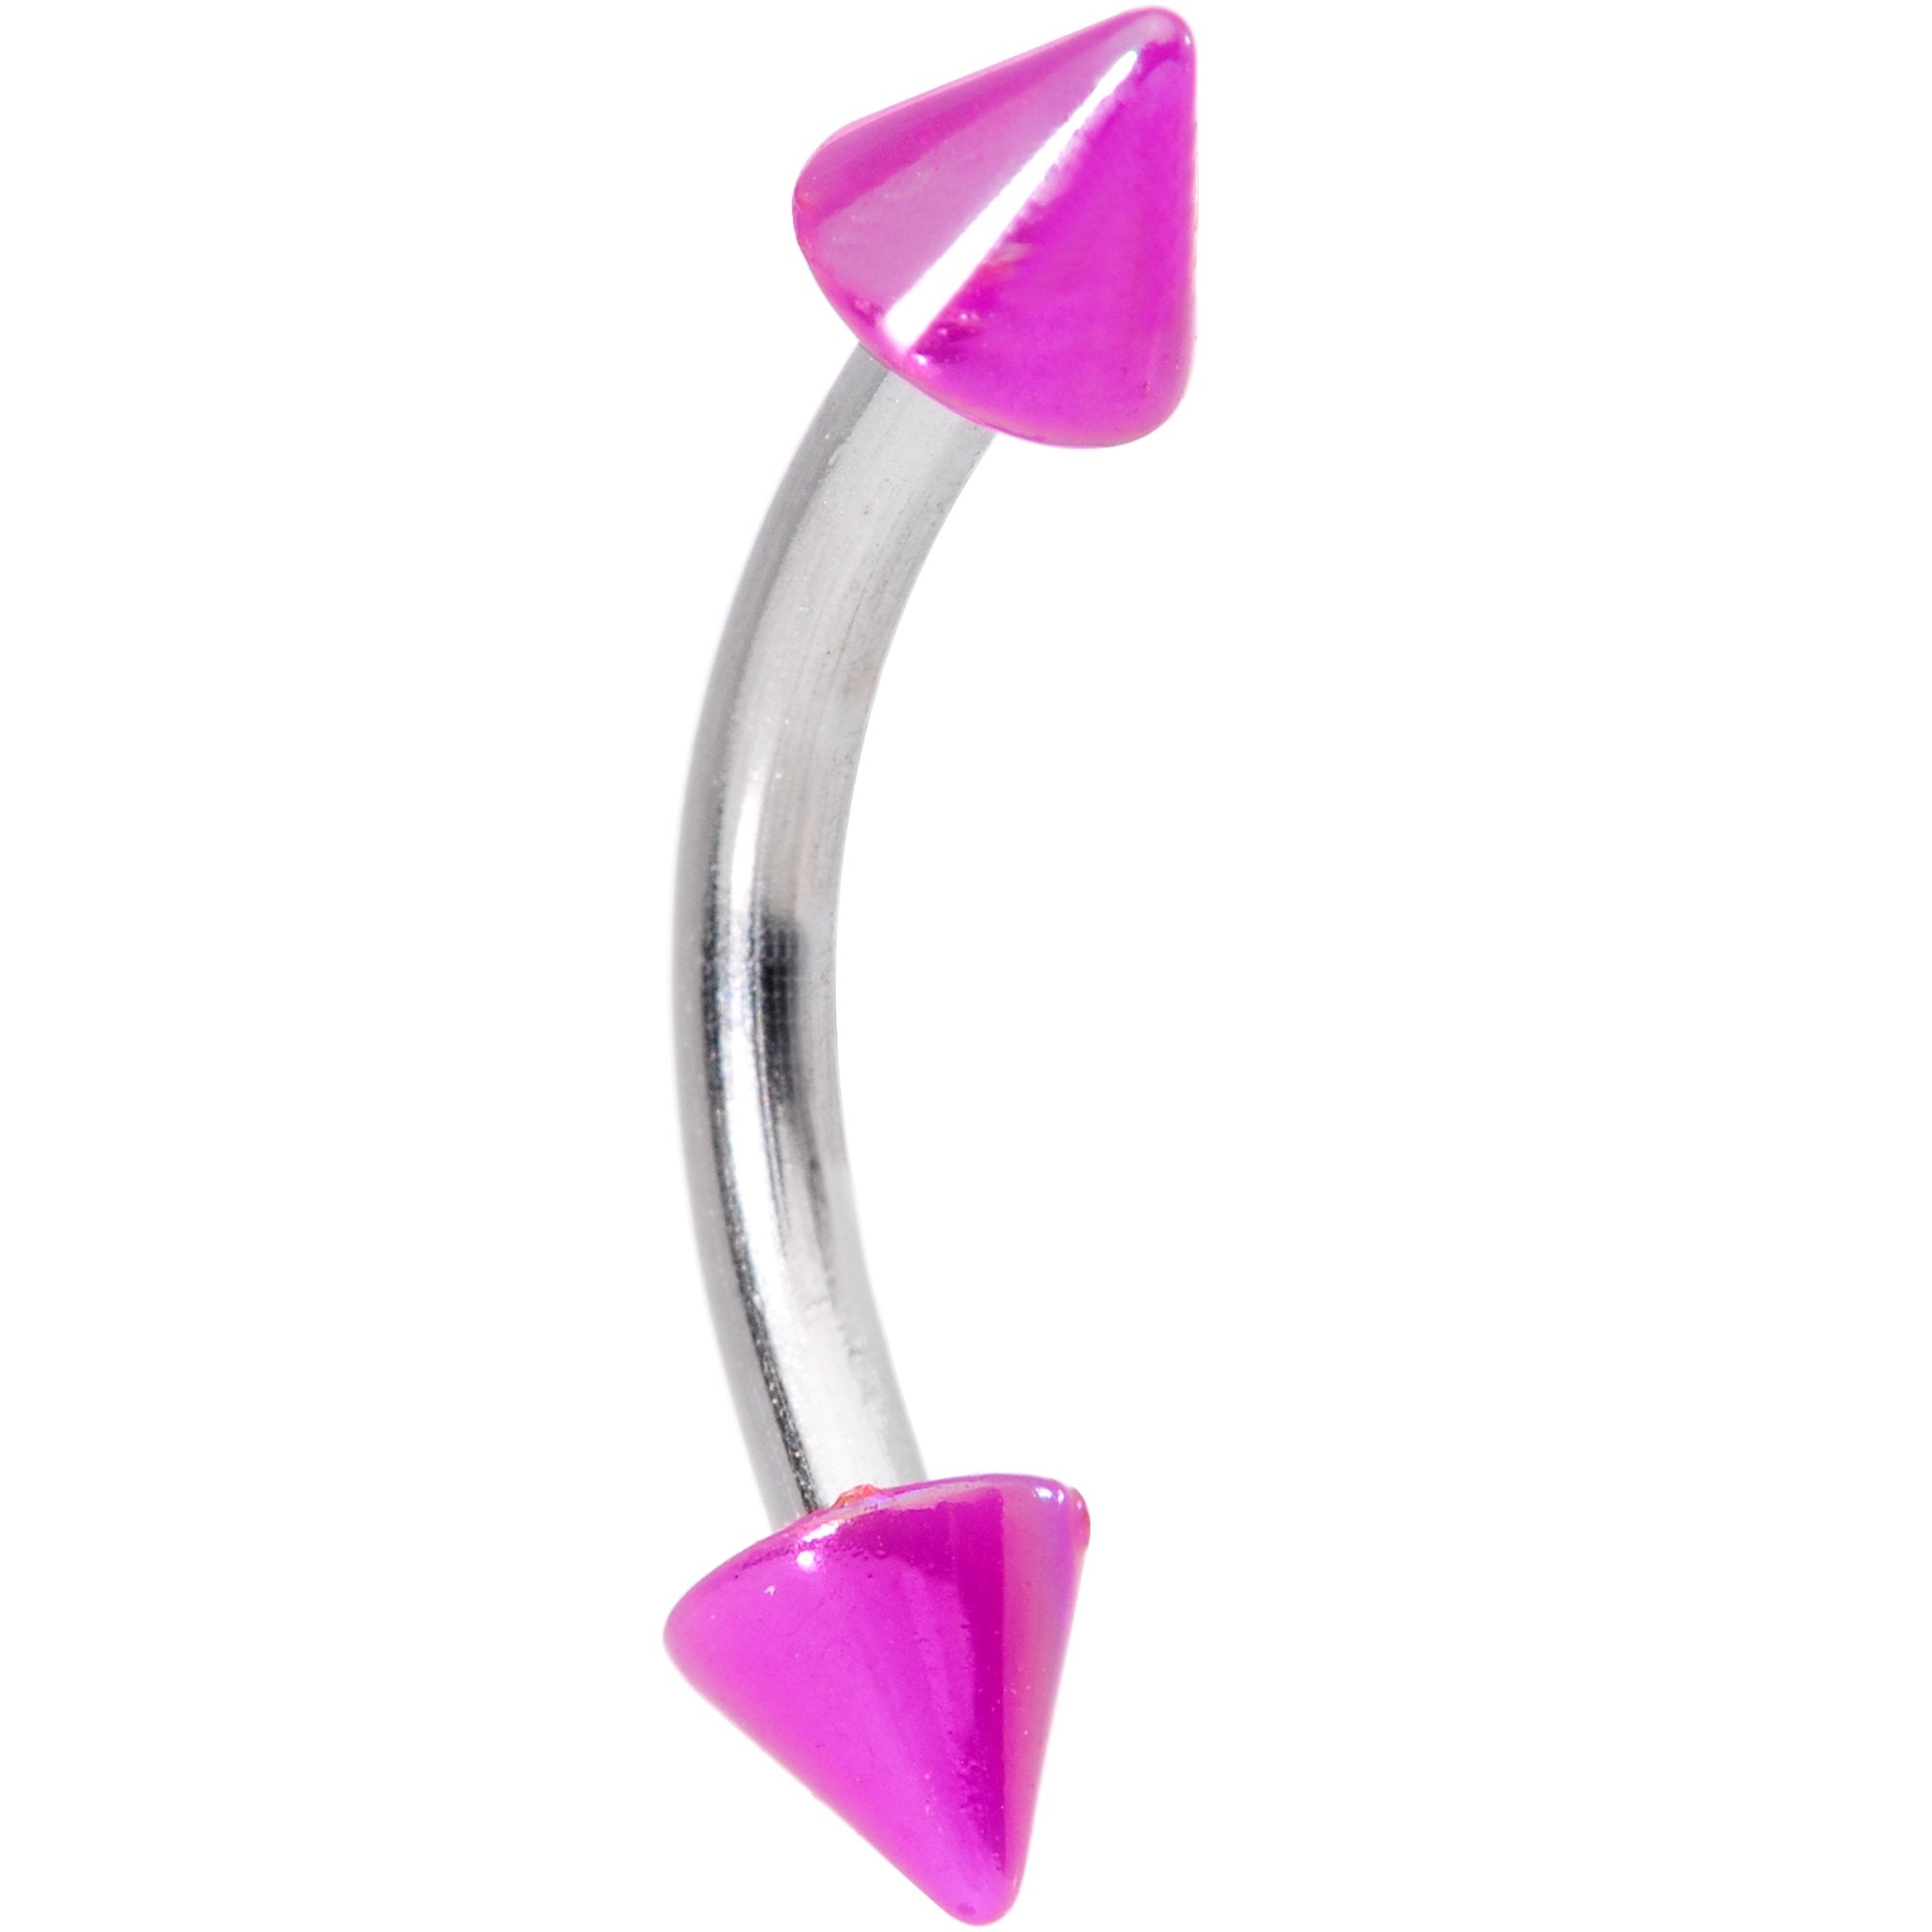 16 Gauge 5/16 Pearlescent Purple Cone Ends Curved Eyebrow Ring